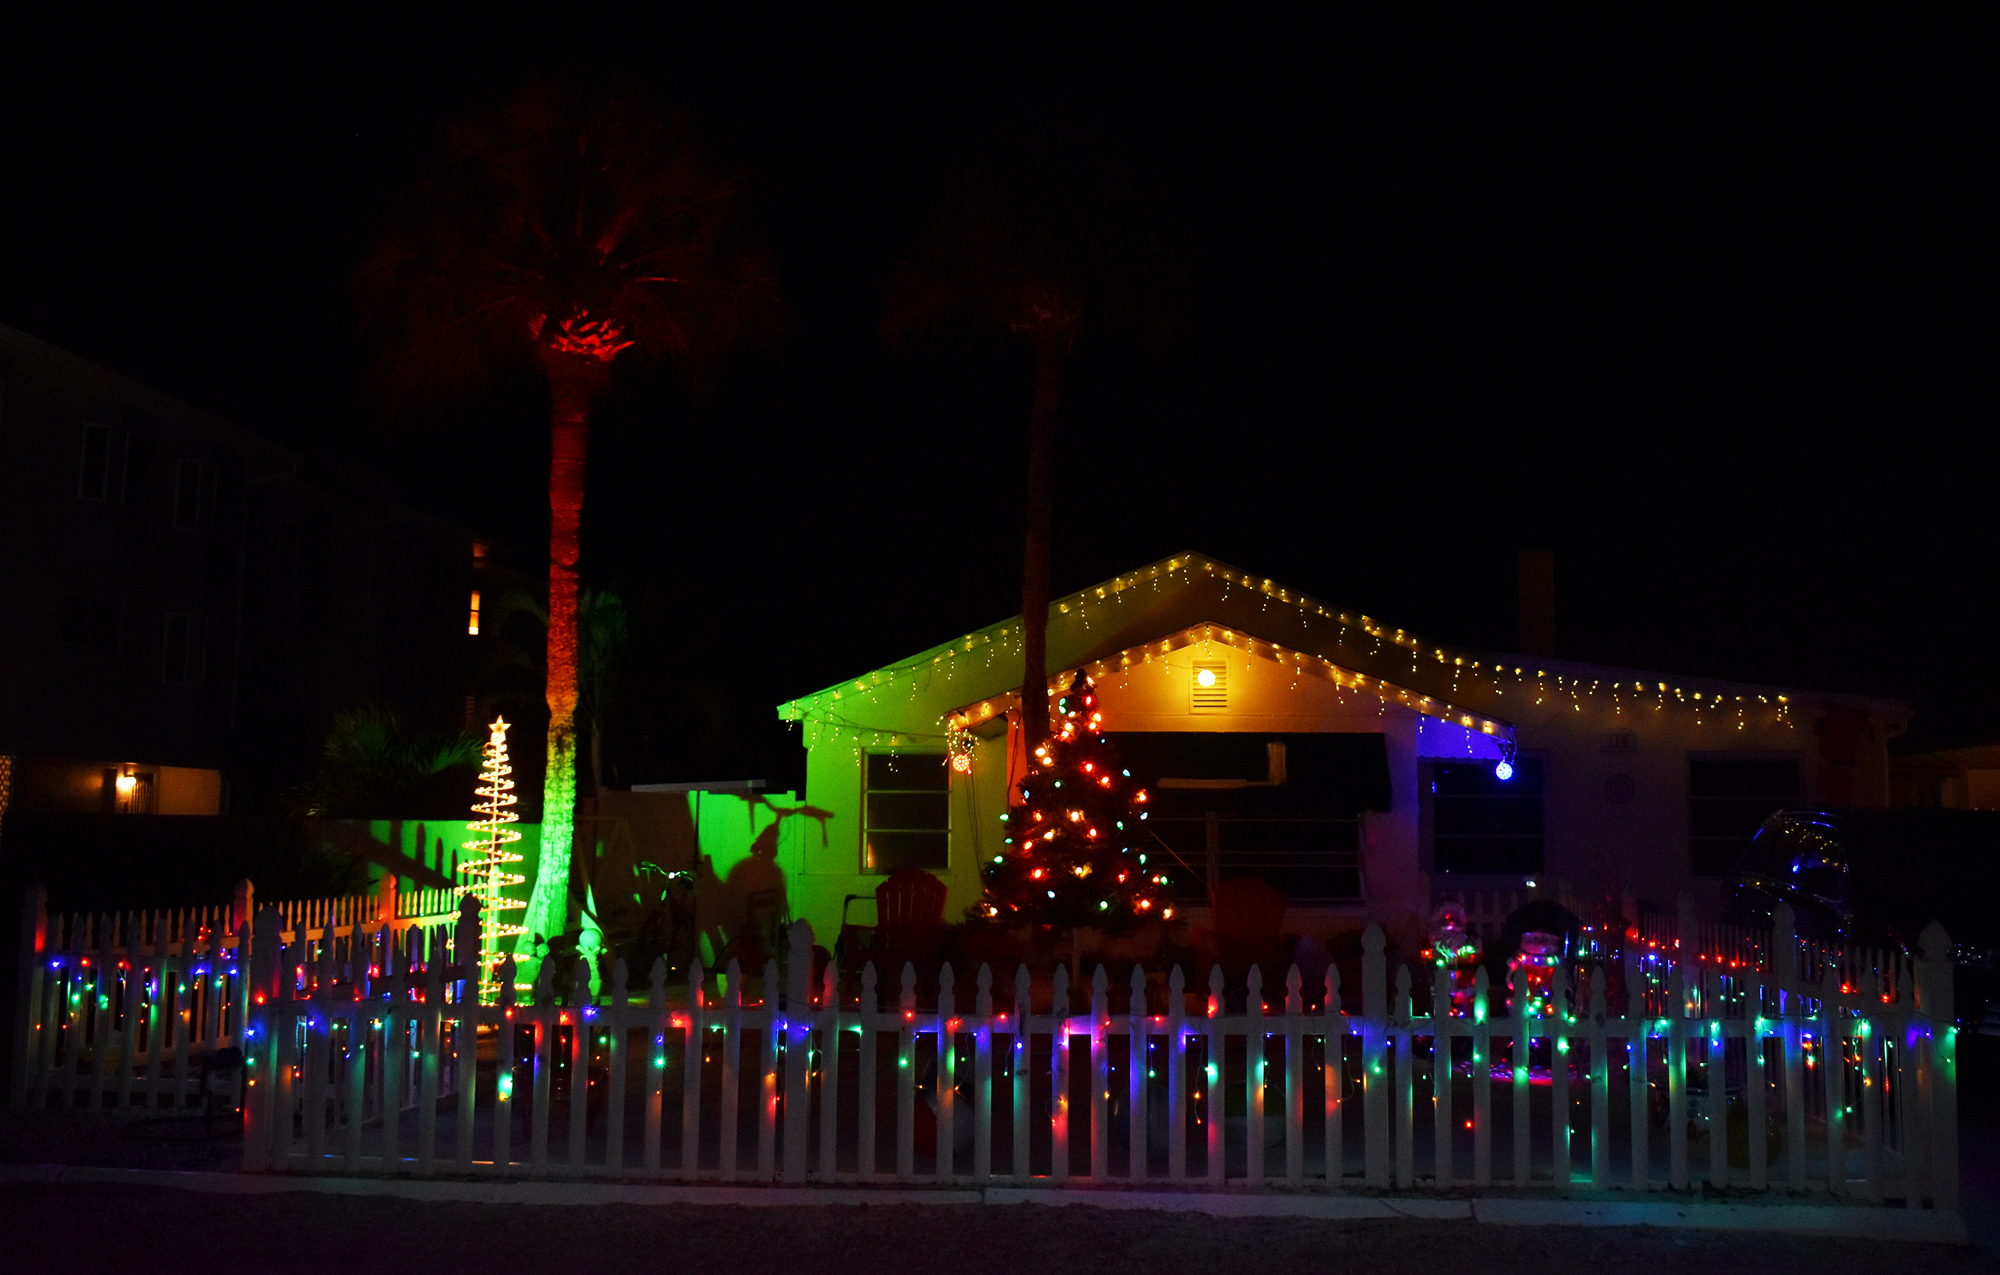 This one was one of the few houses near Lido Beach we saw lit up. It features a snowman, Christmas tree and Santa Claus.